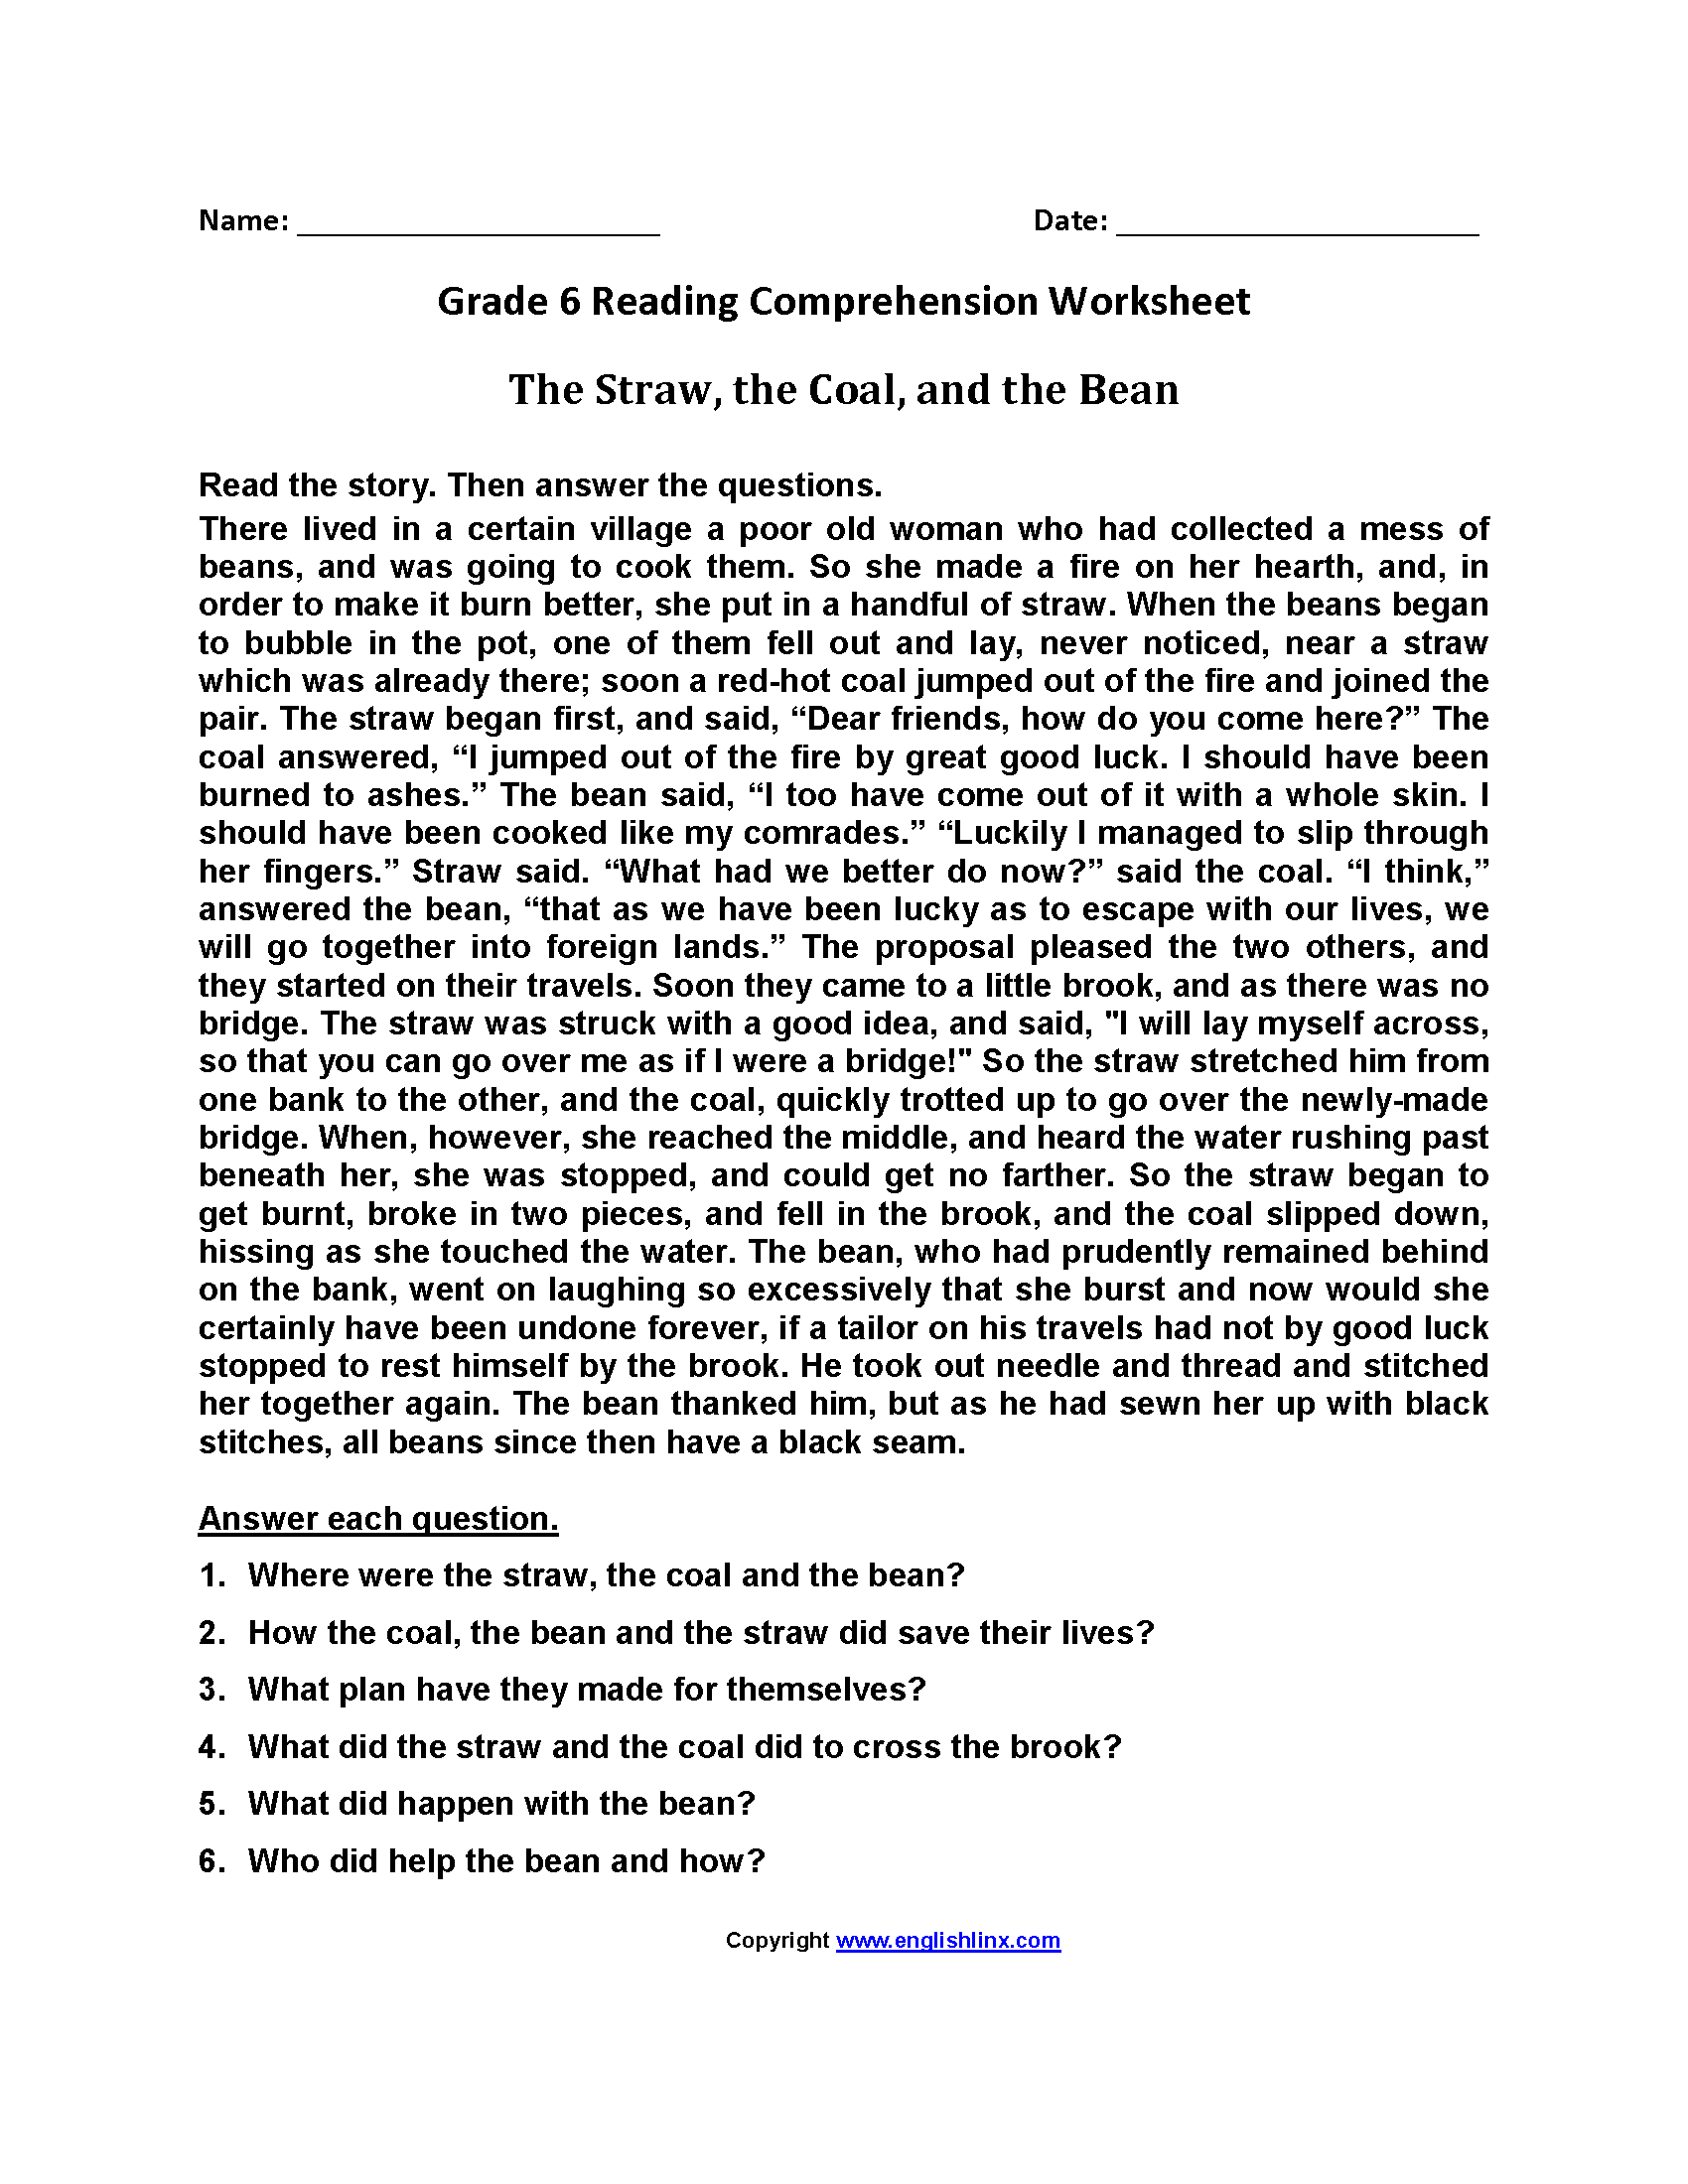 Reading Comprehension Worksheets 6th Grade Multiple Choice